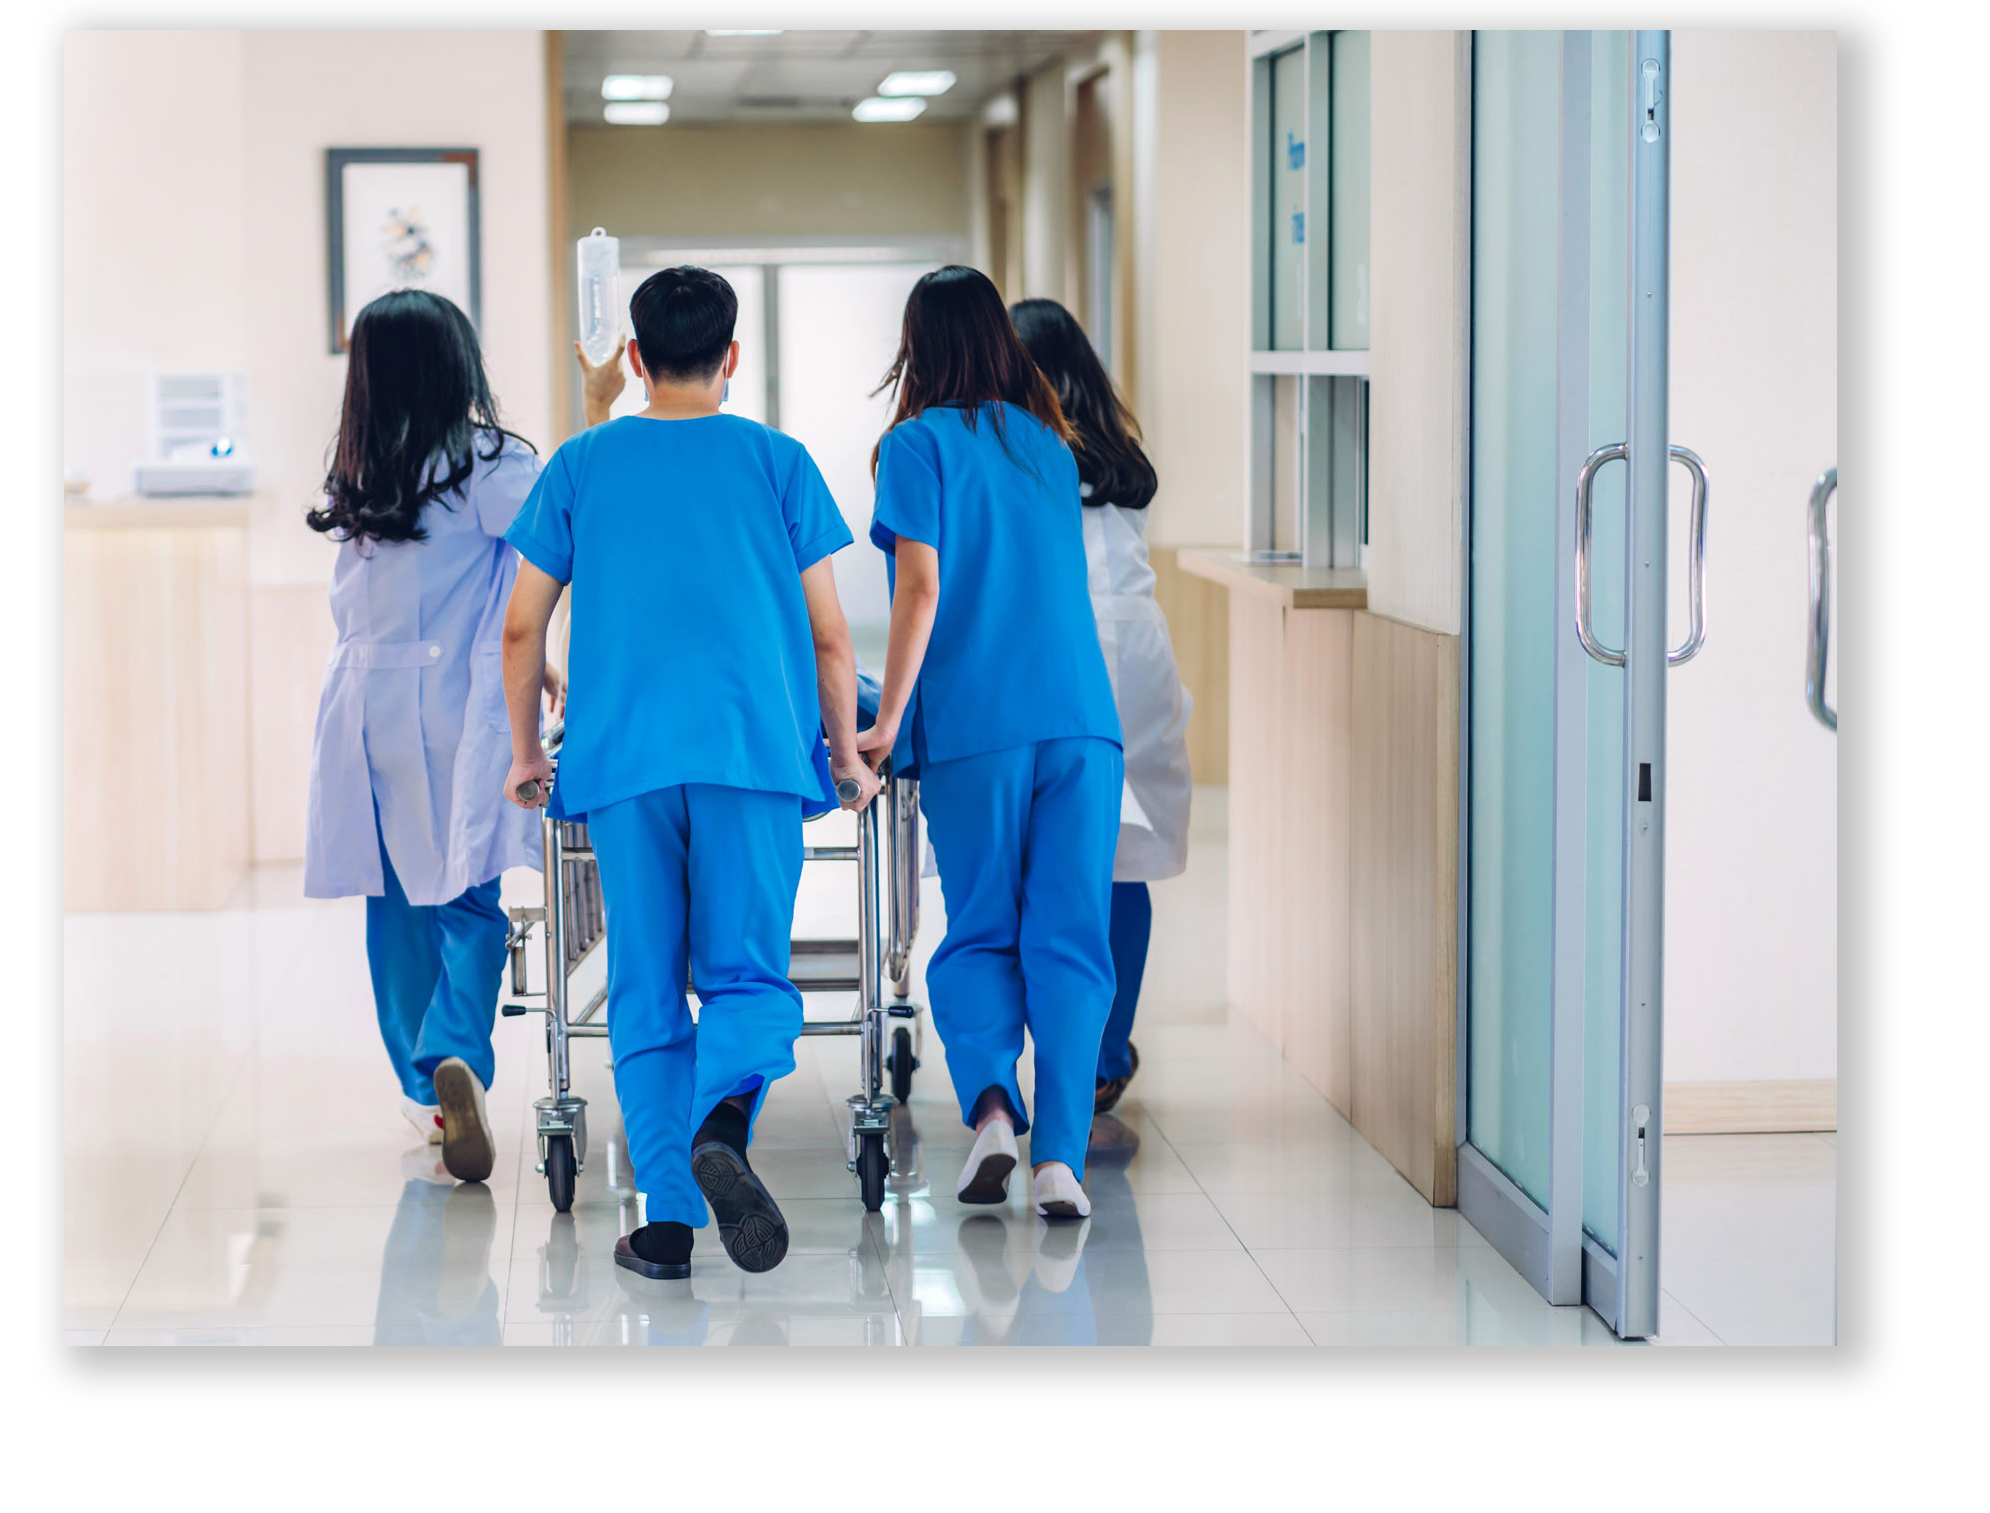 A group of doctors and nurses rushing a patient down a hospital ward corridor to surgery.